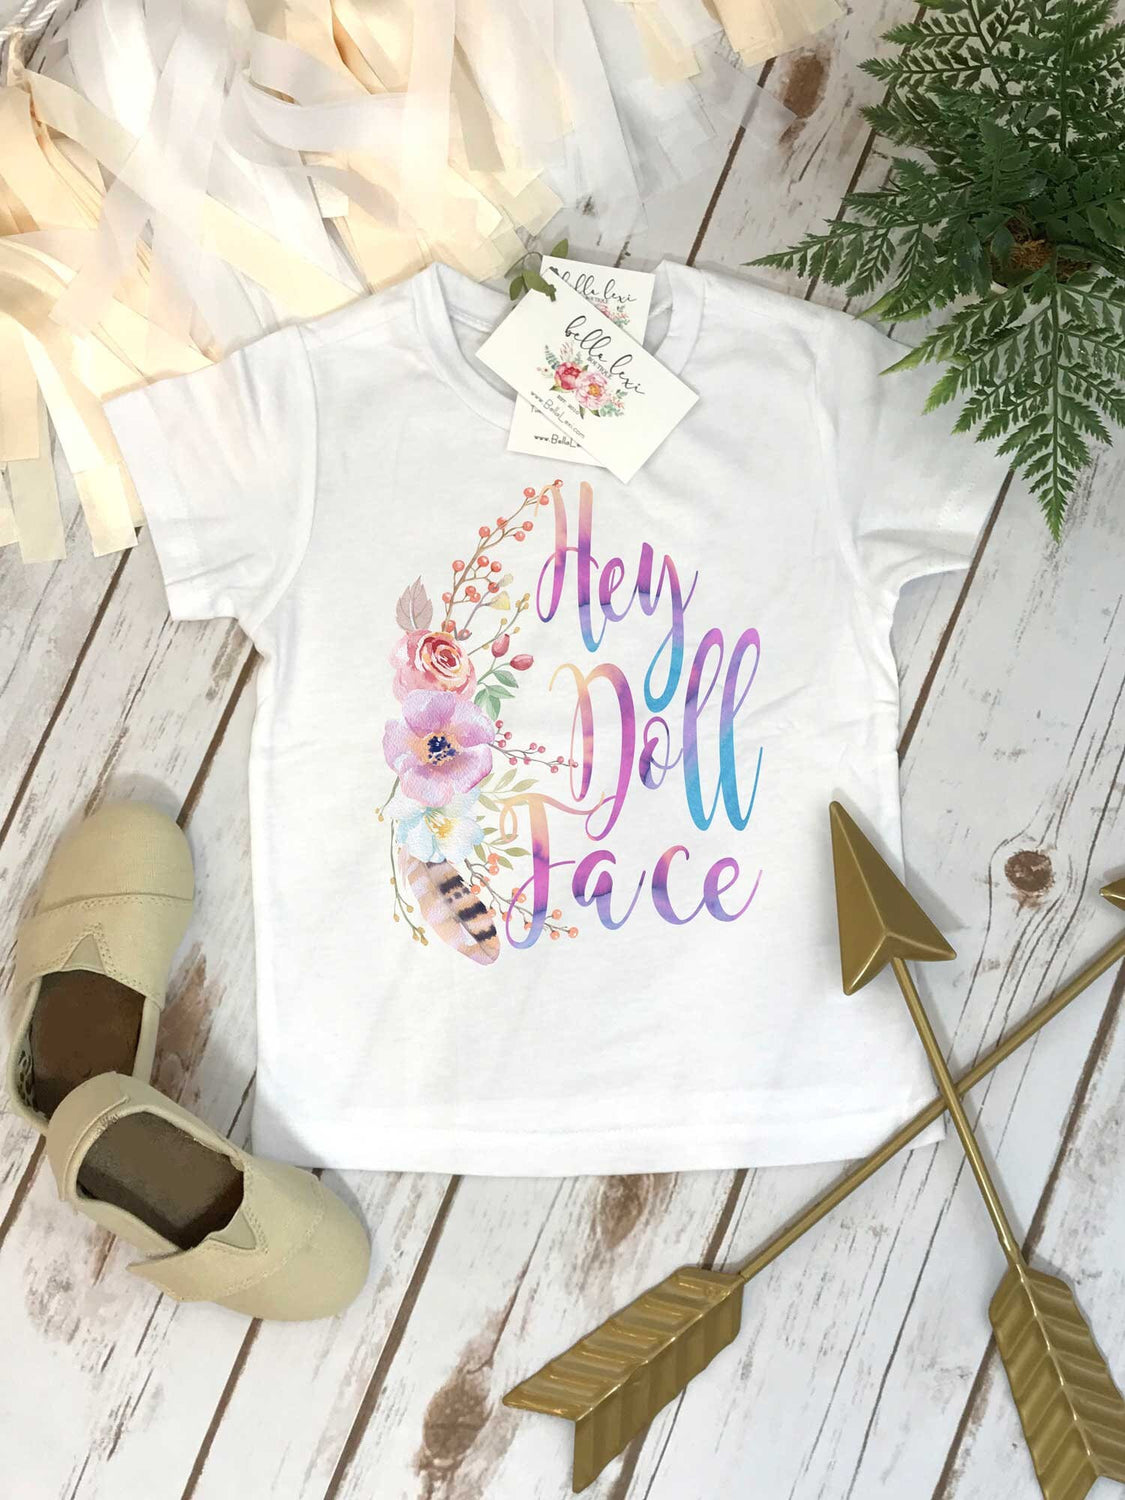 Cute Girl Gift, Hey Doll Face, Baby Shower Gift, Boho Baby Clothes, Cute Baby Clothes, Baby Girl Clothes, Baby Girl Gift, Niece Gift, Boho